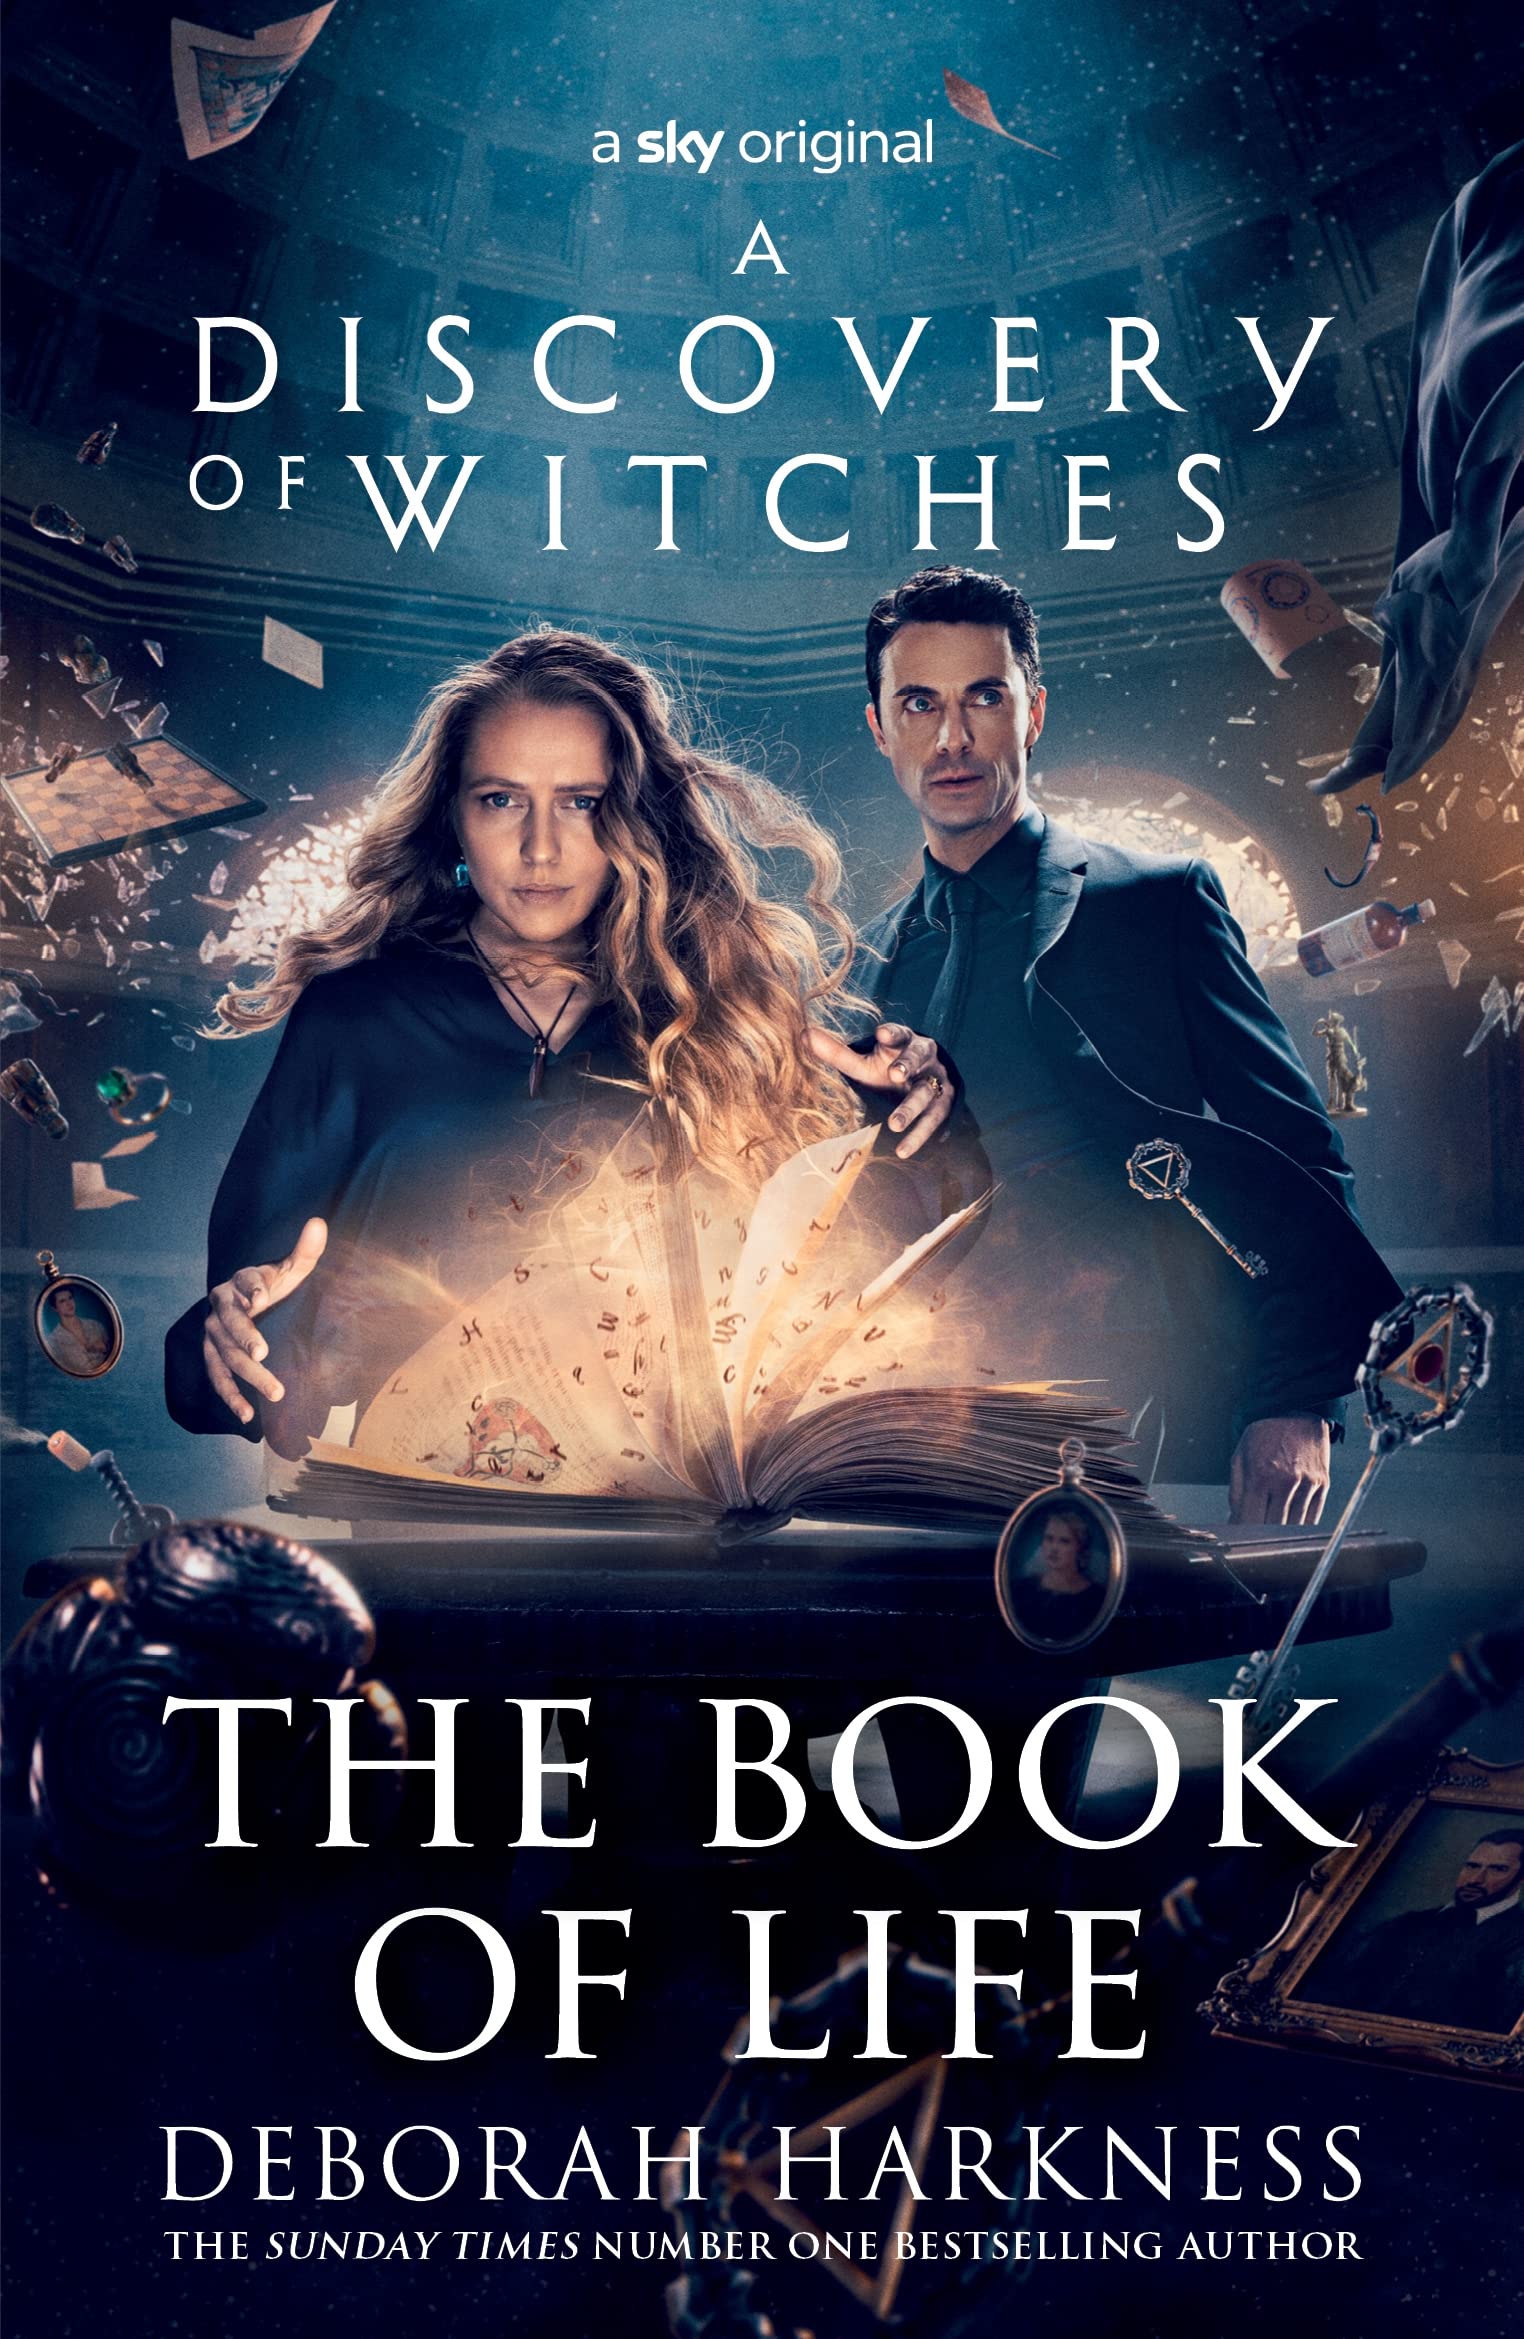 A Discovery of Witches - The Book of Life